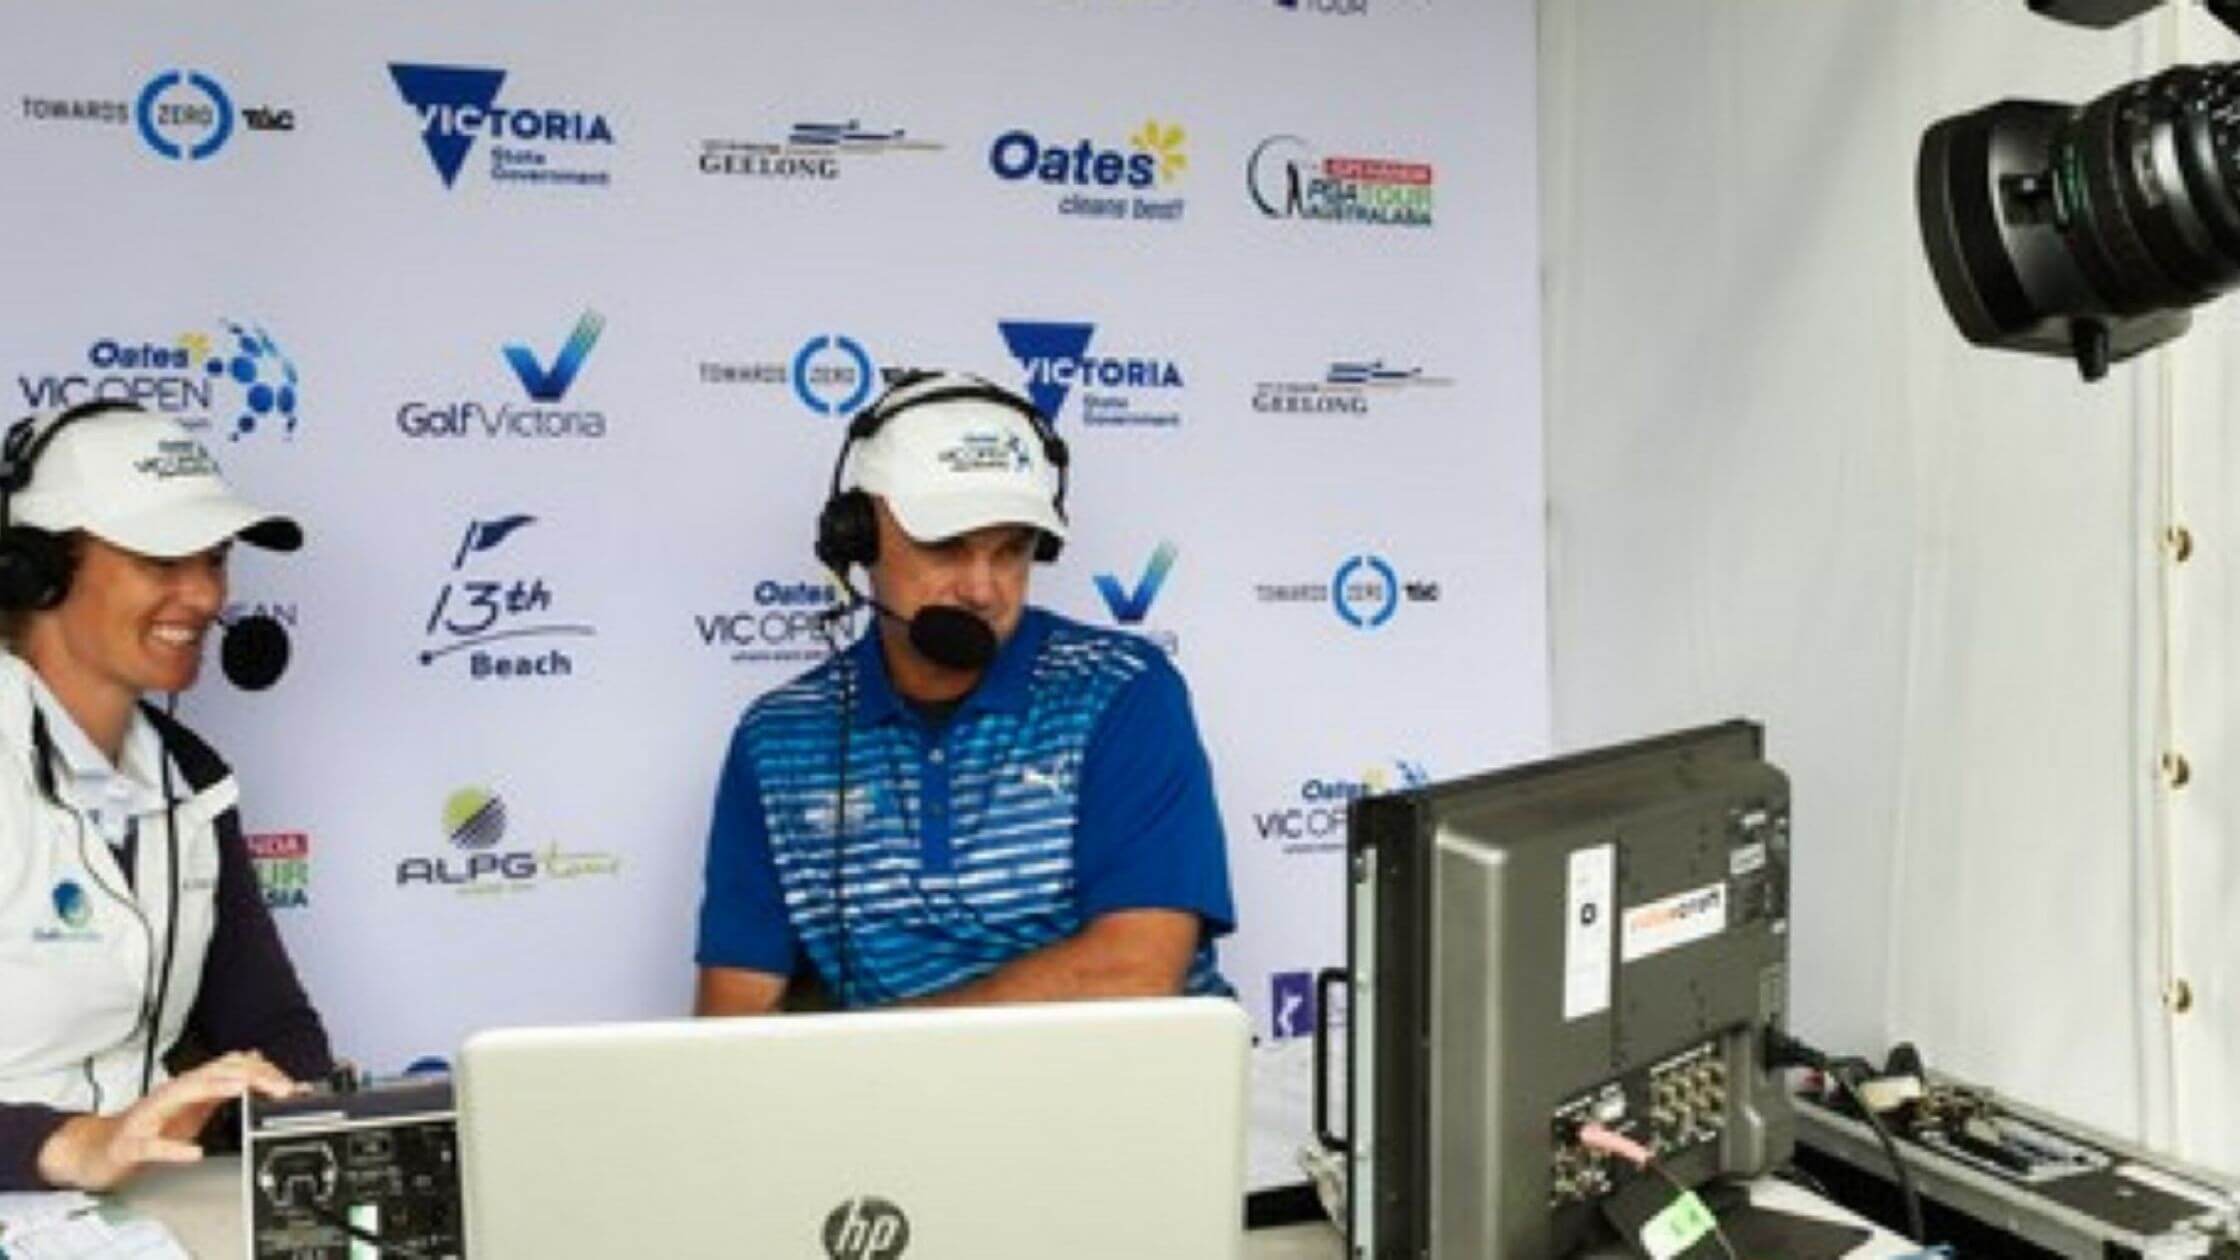 Oates Vic Open to be broadcast internationally